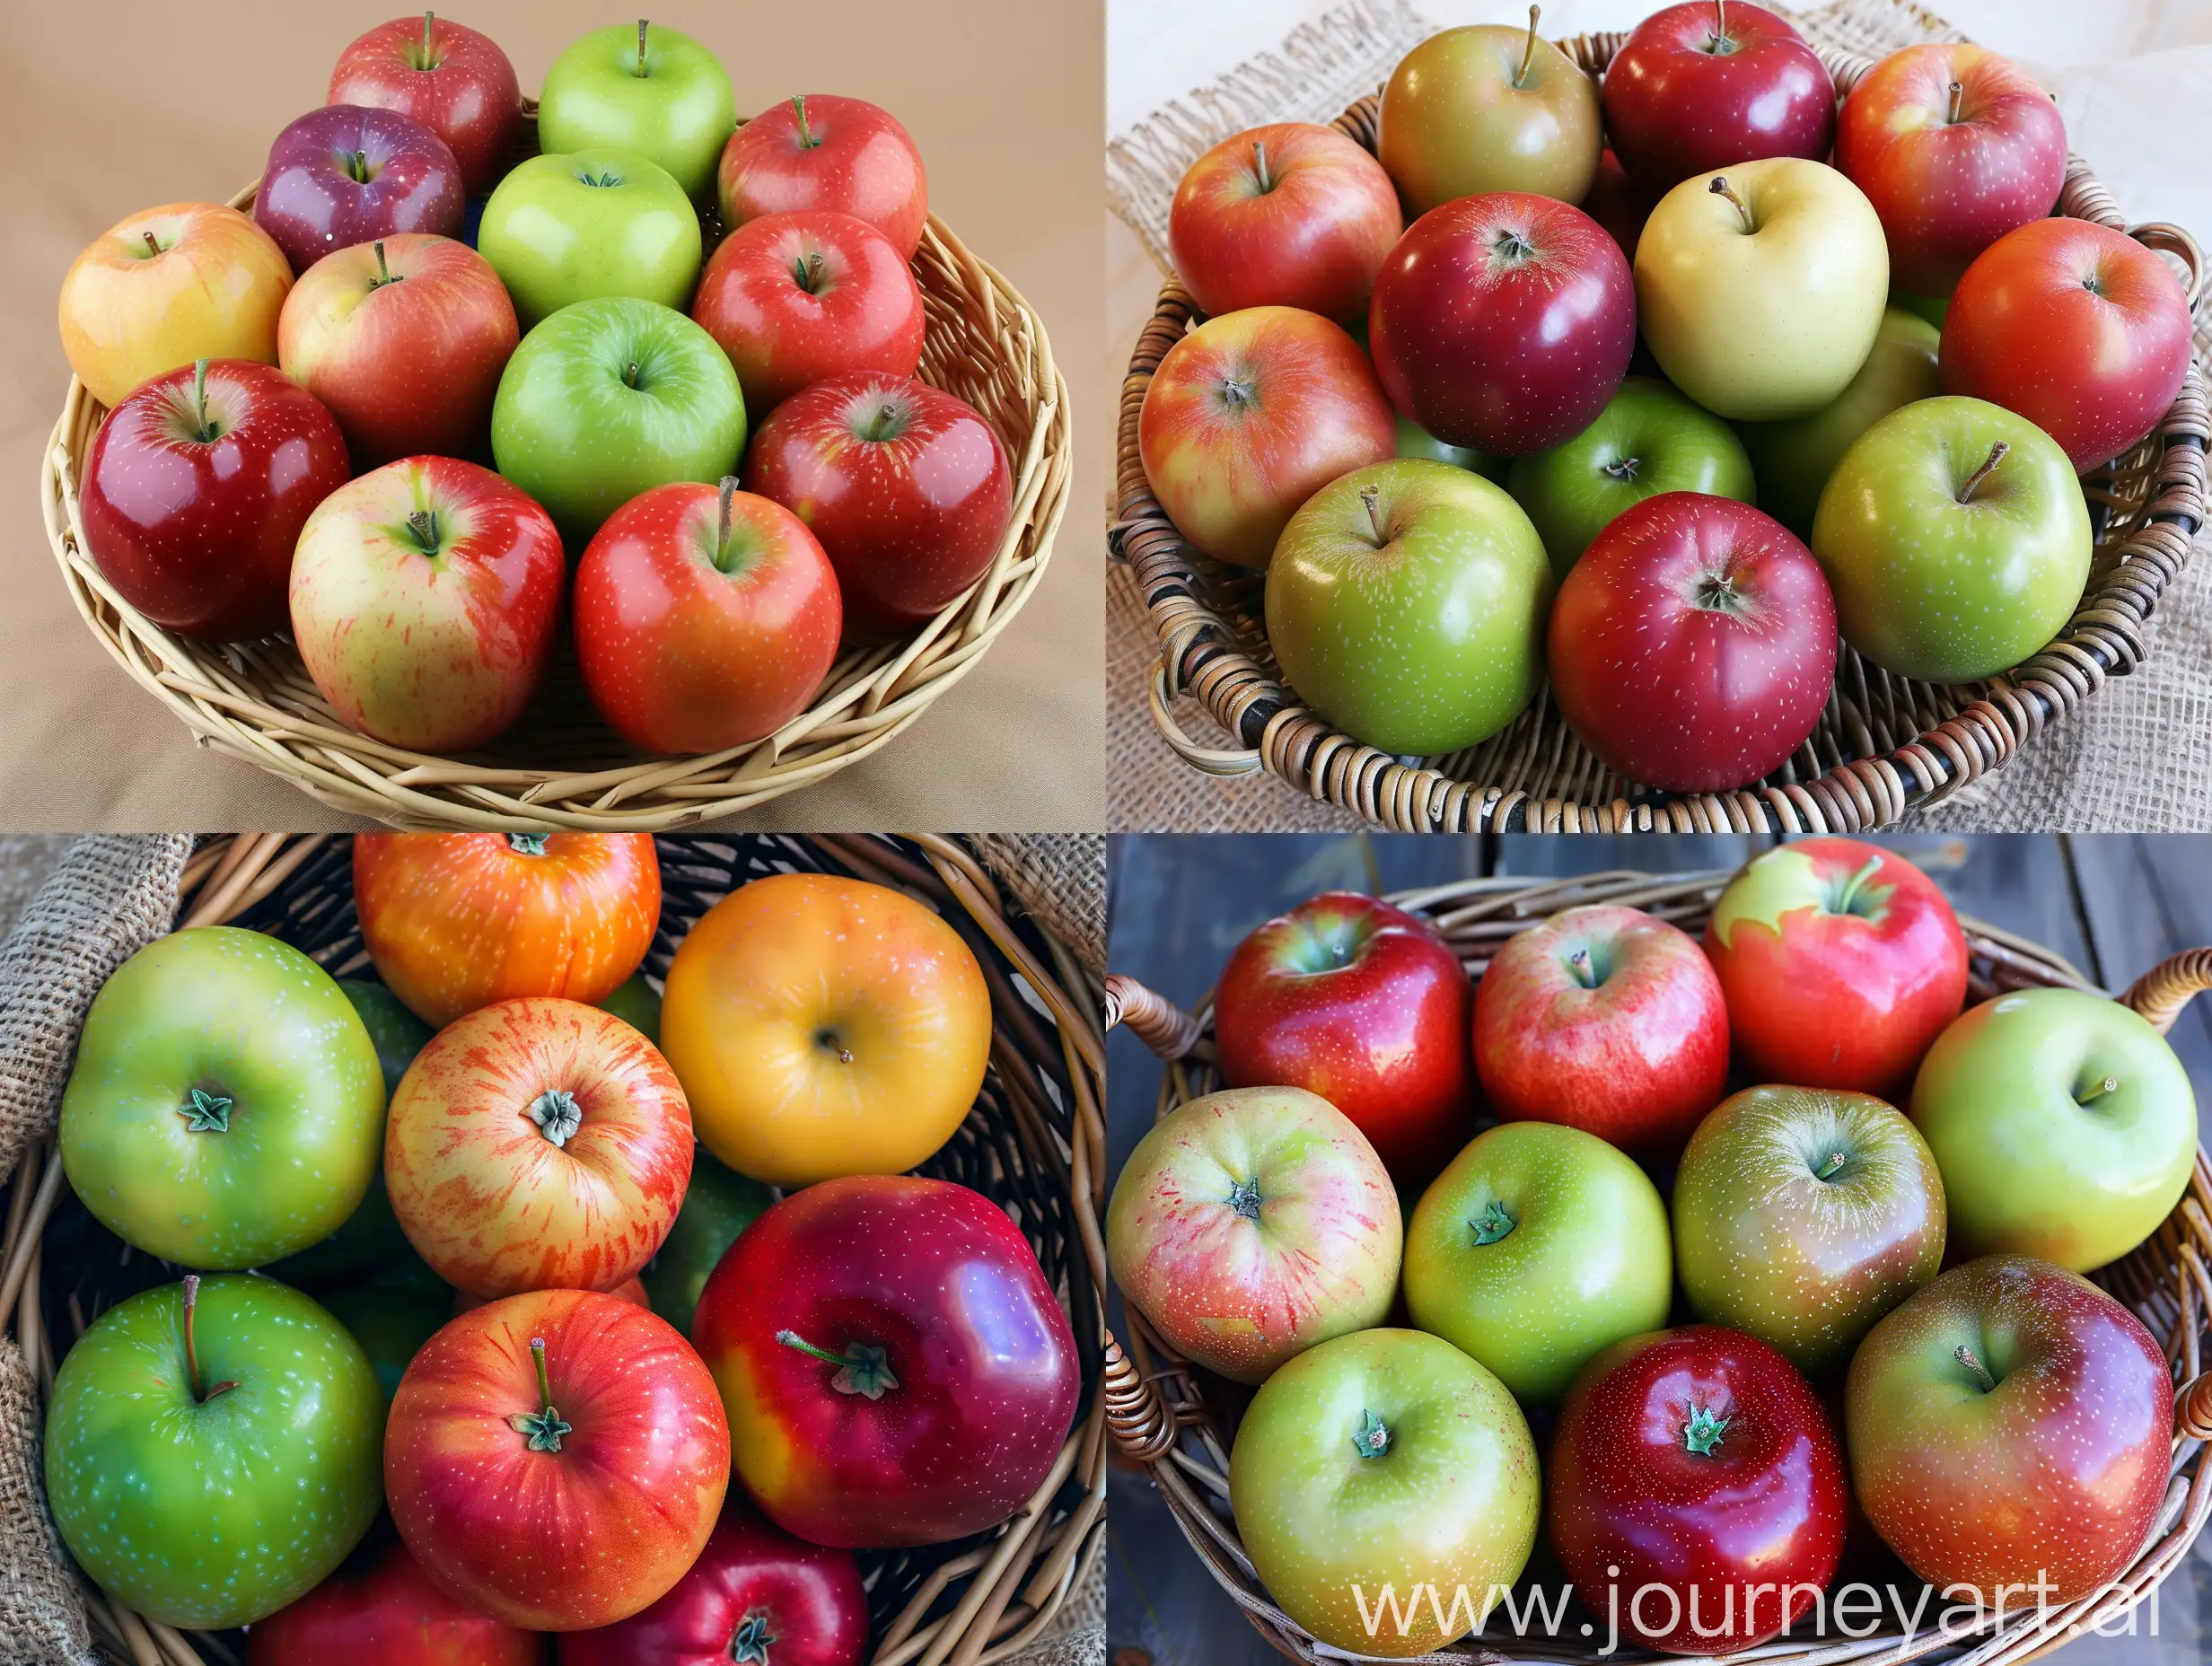 Assorted-Basket-of-Fresh-Apples-in-Vibrant-Colors